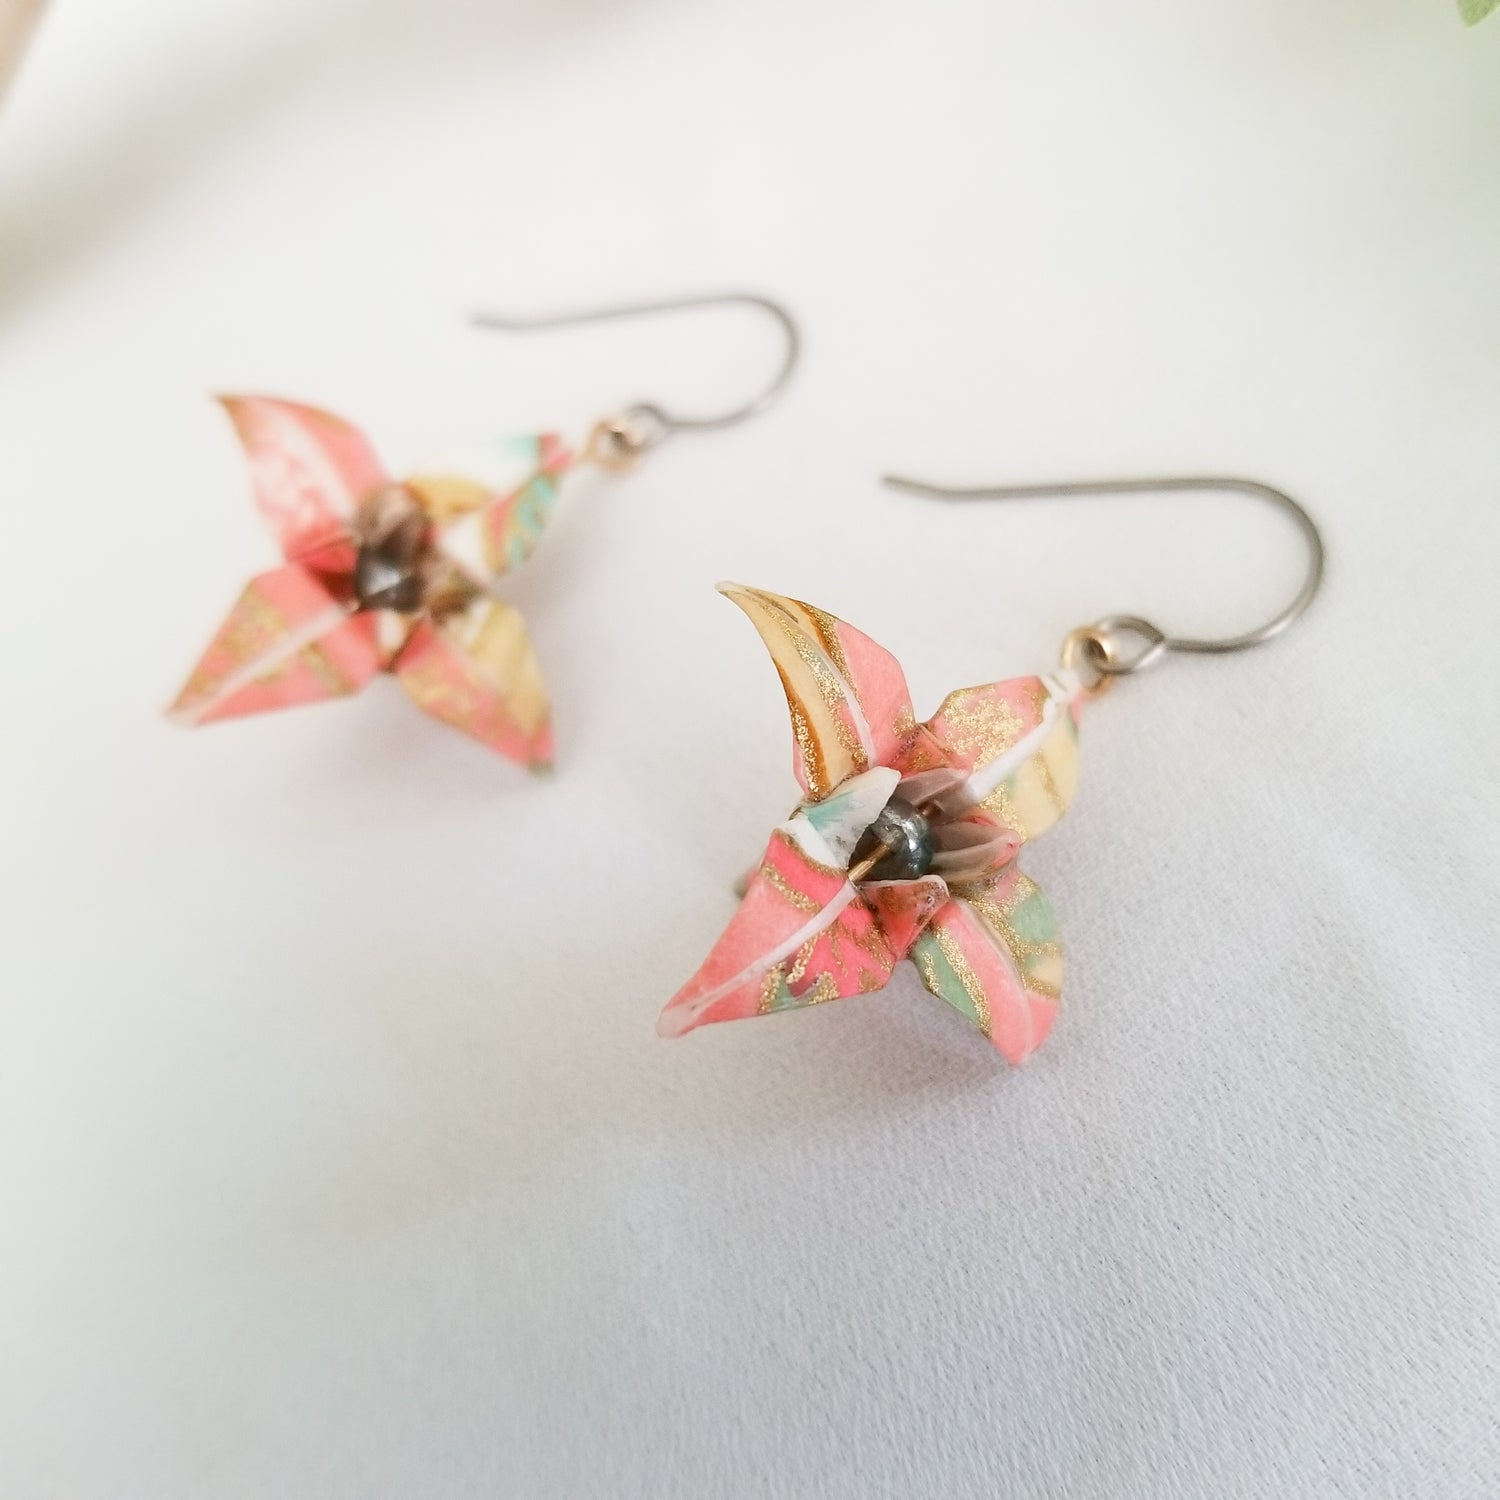 Origami Lily Earrings in peach color. Handmade folded paper flowers made into small earrings. 